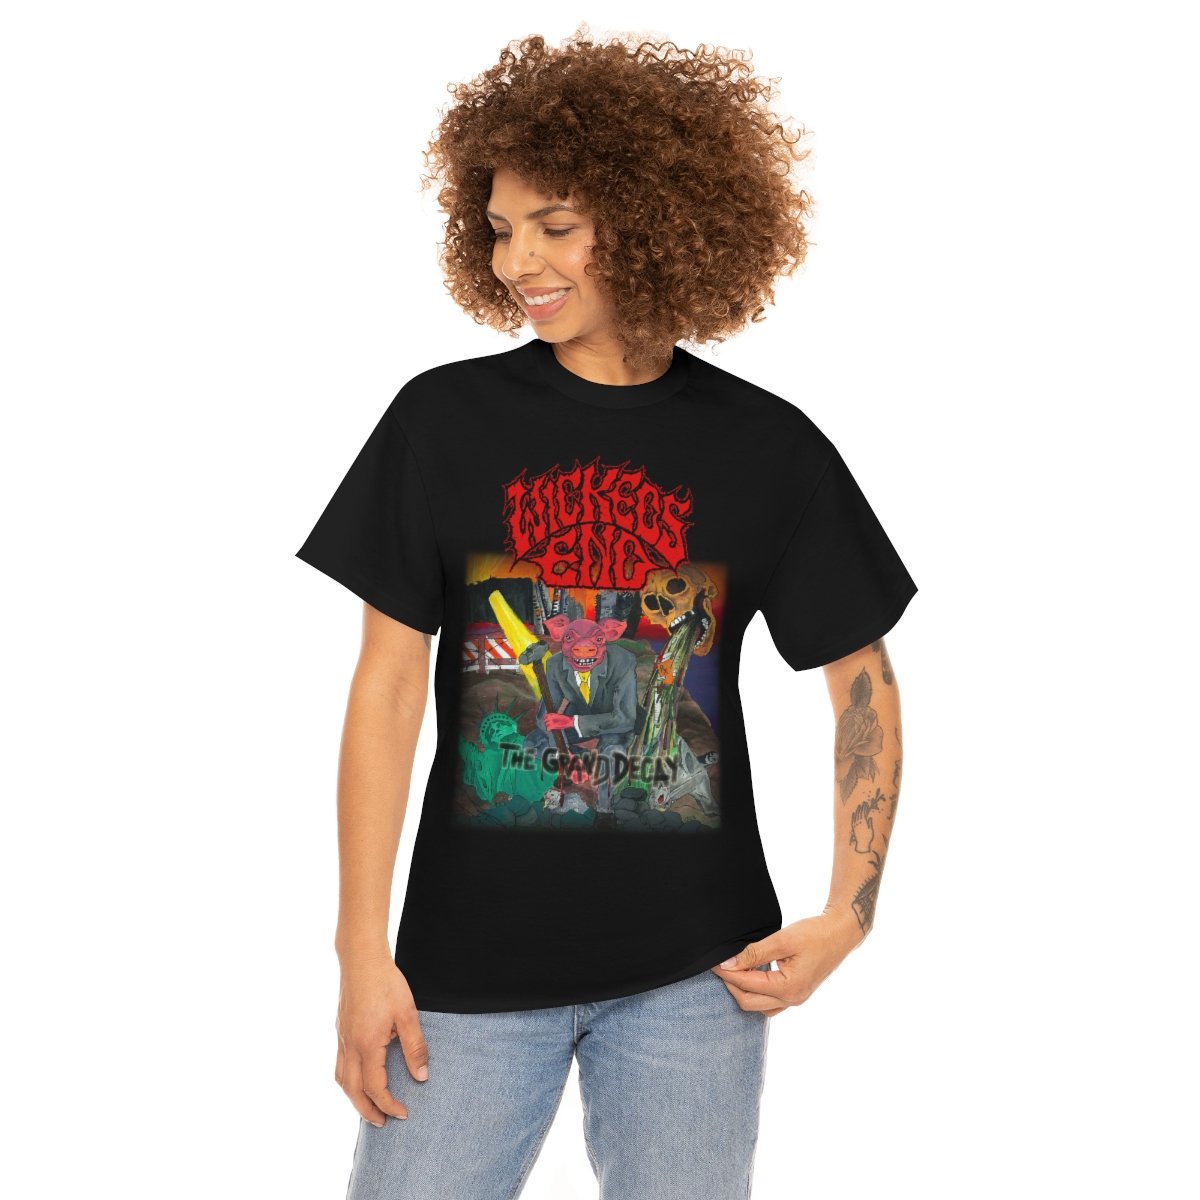 Wickeds End – The Grand Decay Short Sleeve Tshirt (5000)